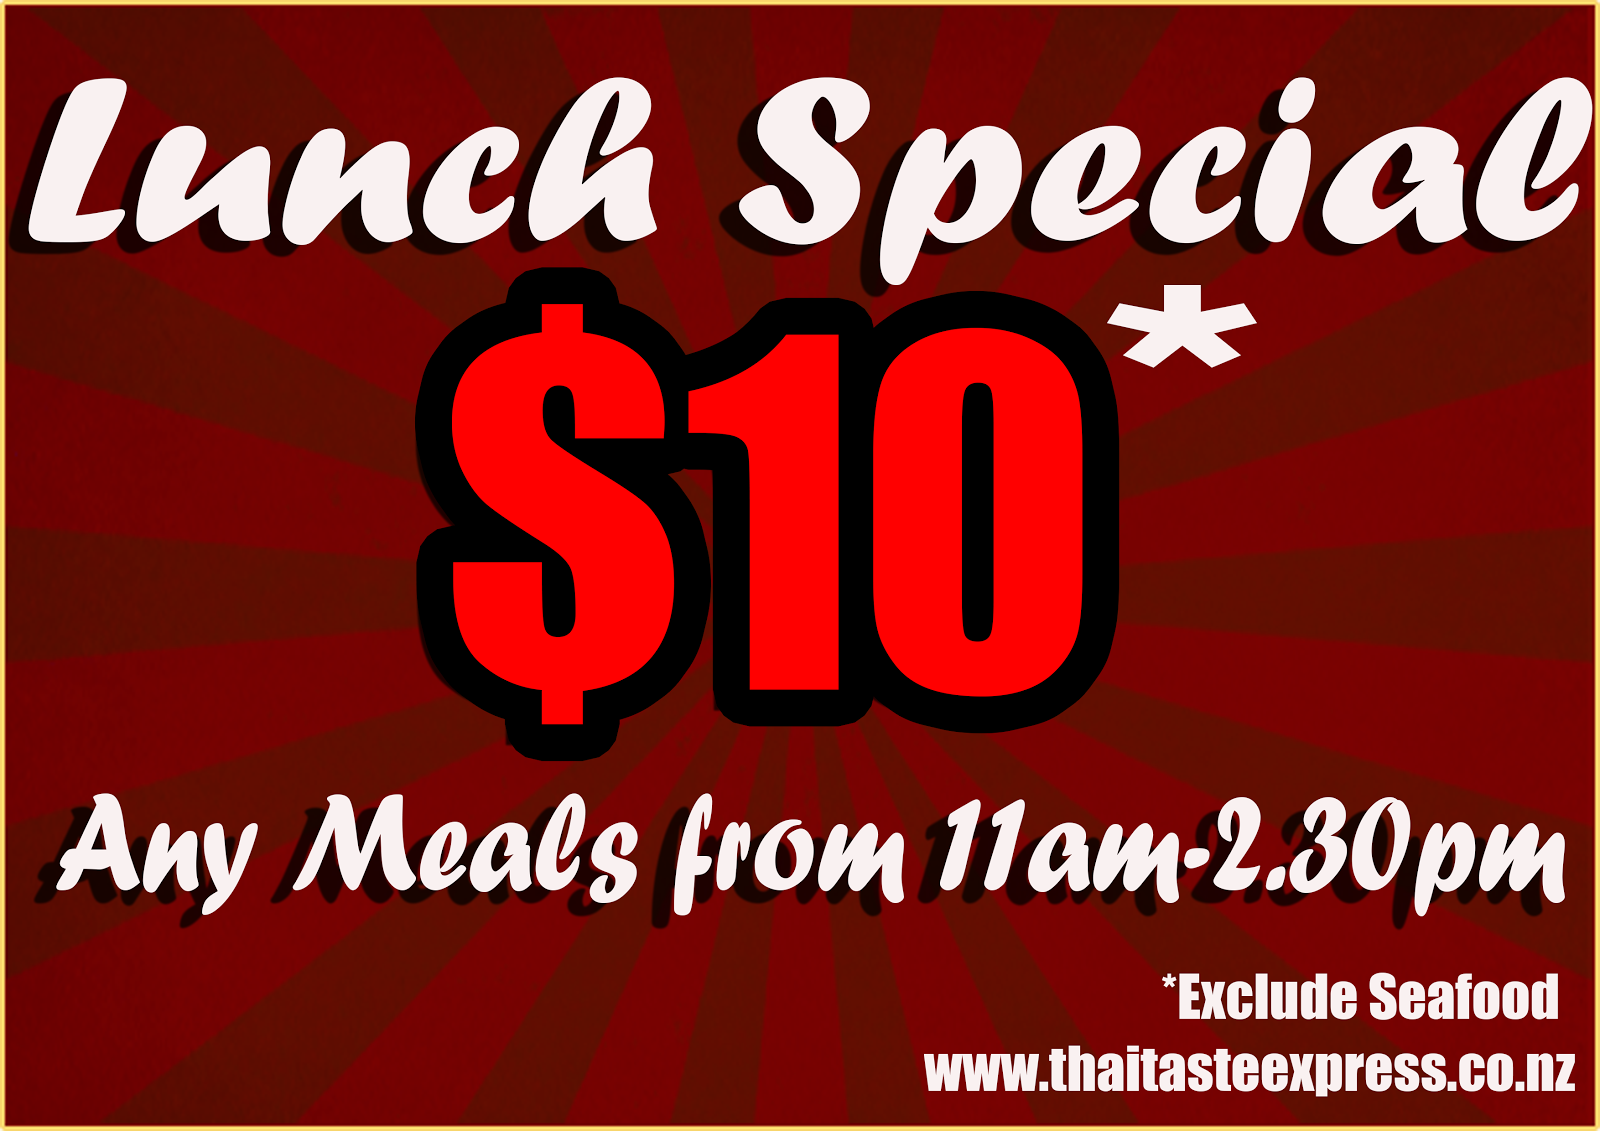 Lunch Special $10 Available Now